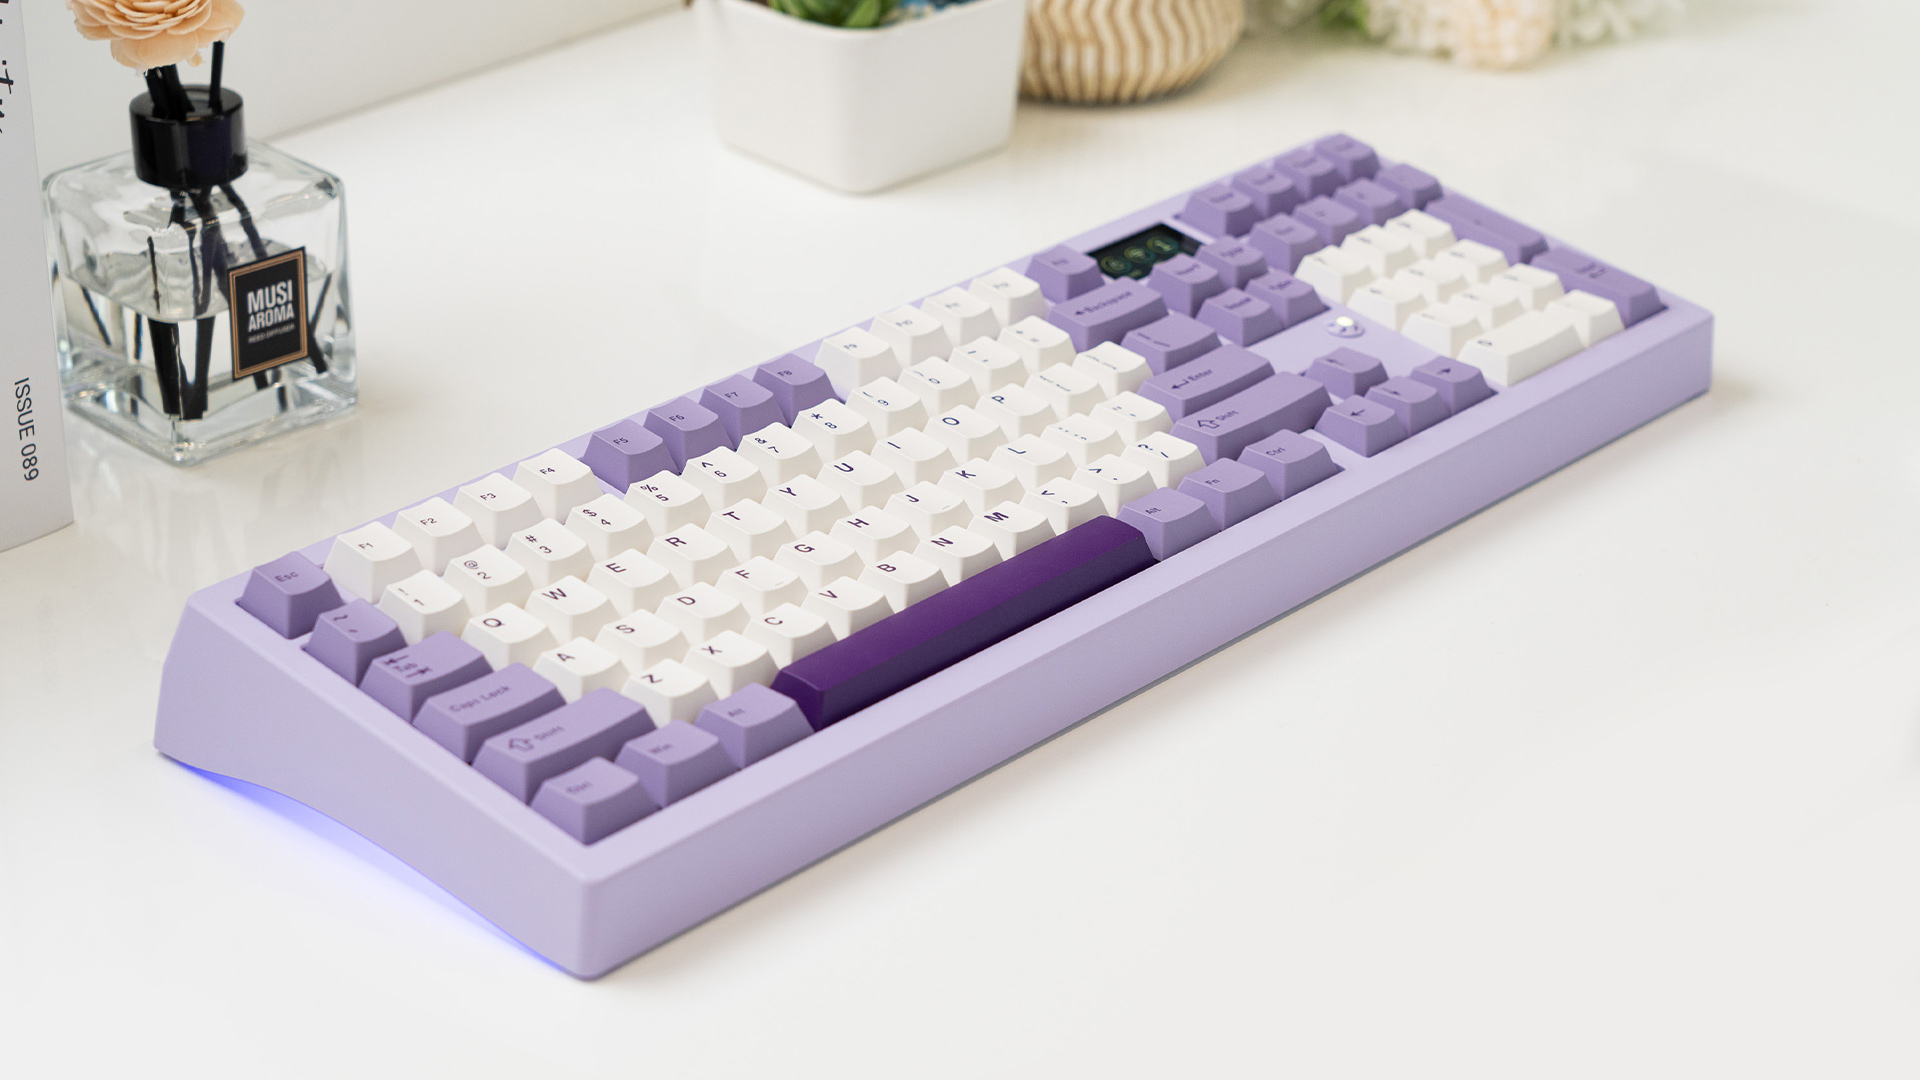 [In Stock]  Zoom98 - EE Lilac